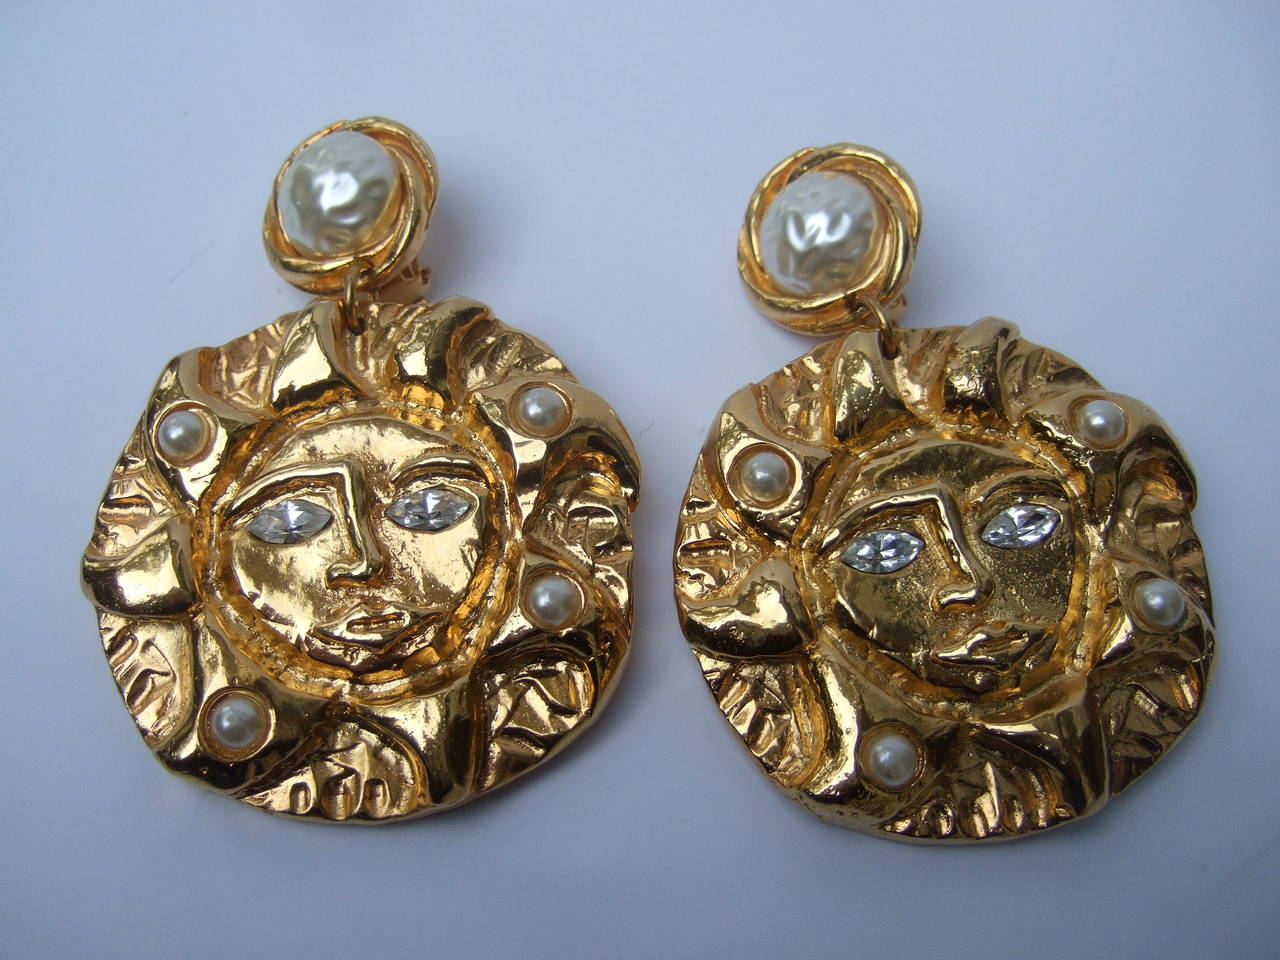 Massive gilt jeweled sun earrings designd by Dominique Paris c 1980s
The unique large scale runway style earrings are designed with a dangling sun medallions. The gilded sun is embellished with diamante crystal eyes with resin enamel pearls